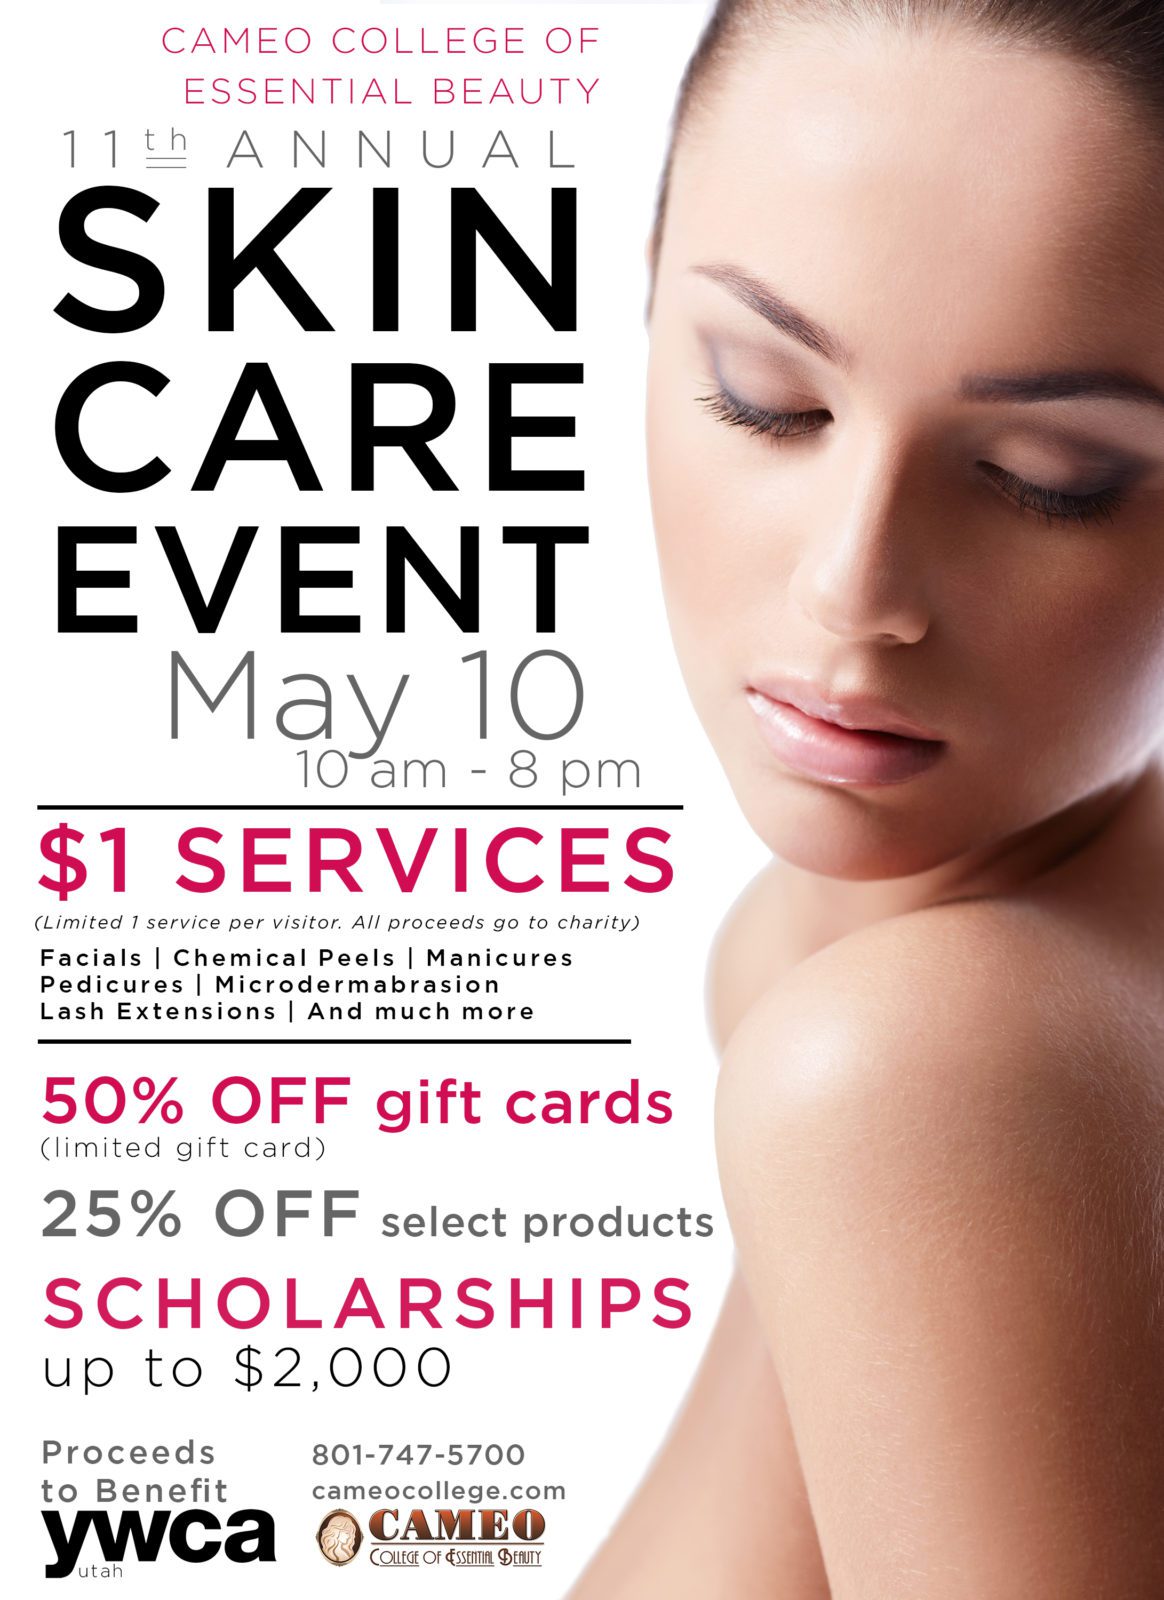 11th Annual Skin Care Event May 10 | Cameo College of Essential Beauty